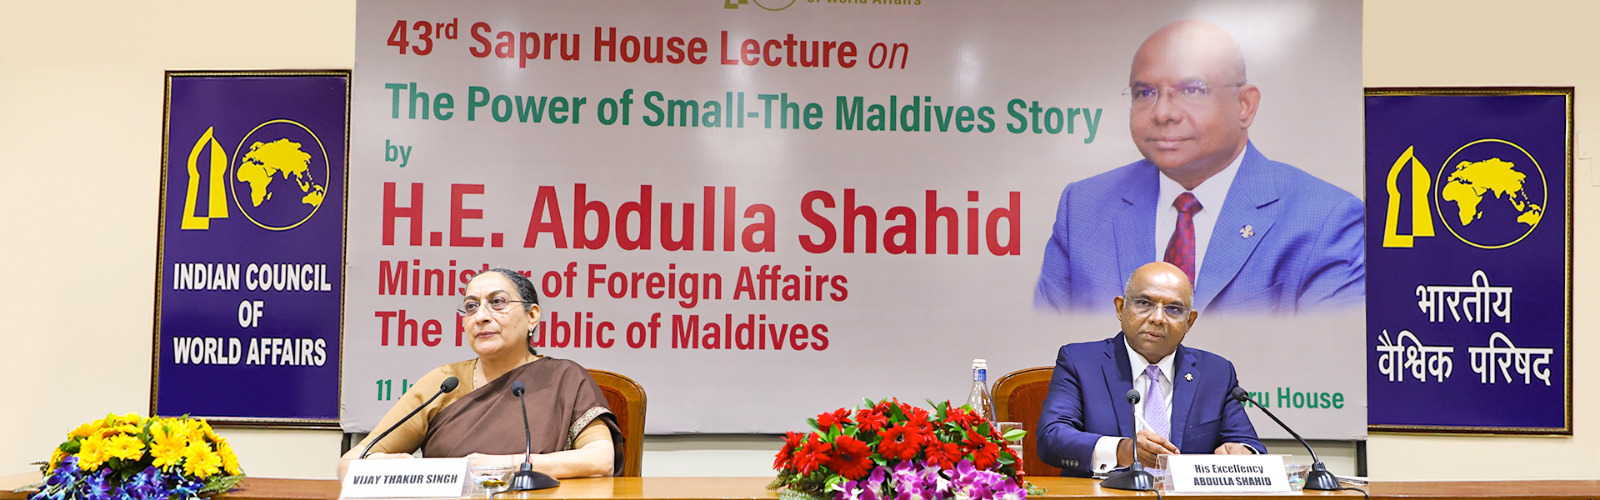 L-R: Amb. Vijay Thakur Singh, DG, ICWA & H.E. Abdulla Shahid, Minister of Foreign Affairs, The Republic of Maldives at the 43rd Sapru House Lecture on “The Power of Small - The Maldives Story” at Sapru House, 11 July 2023